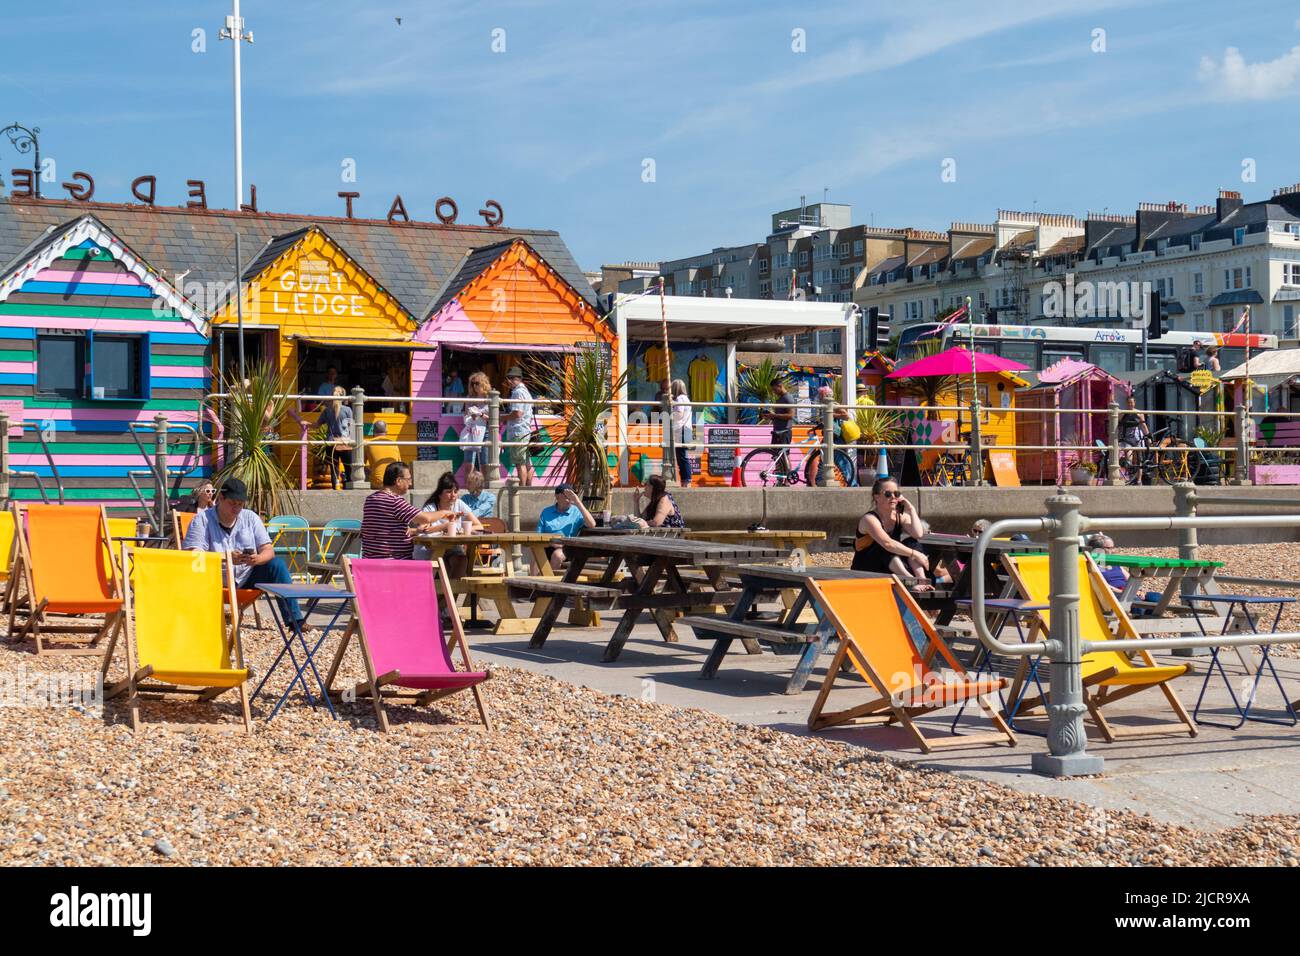 Hastings, East Sussex, UK. 15 Jun, 2022. UK Weather: Hot and sunny at the seaside town of Hastings in East Sussex as Brits enjoy the warm weather today along the seafront promenade. Colourful deckchairs on the beach at this cafe. Photo Credit: Paul Lawrenson /Alamy Live News Stock Photo